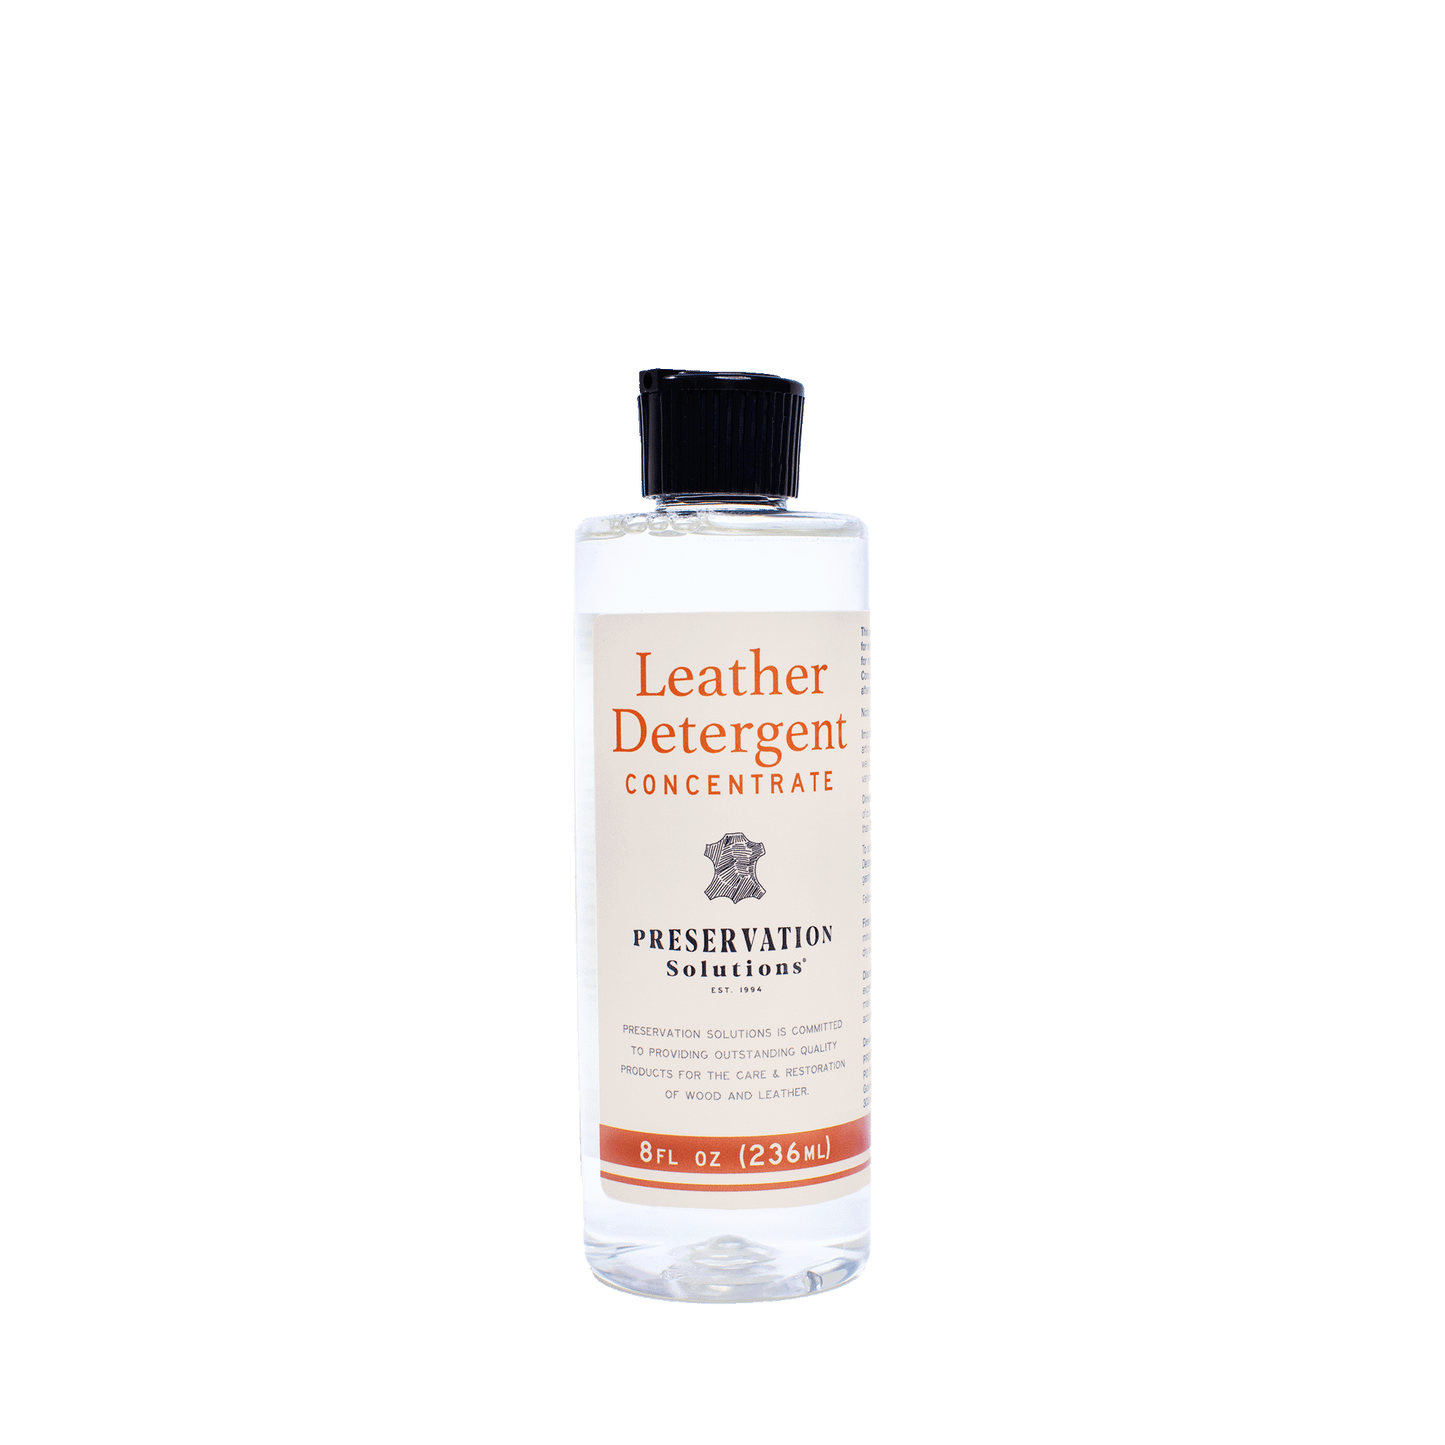 Leather Detergent Concentrate